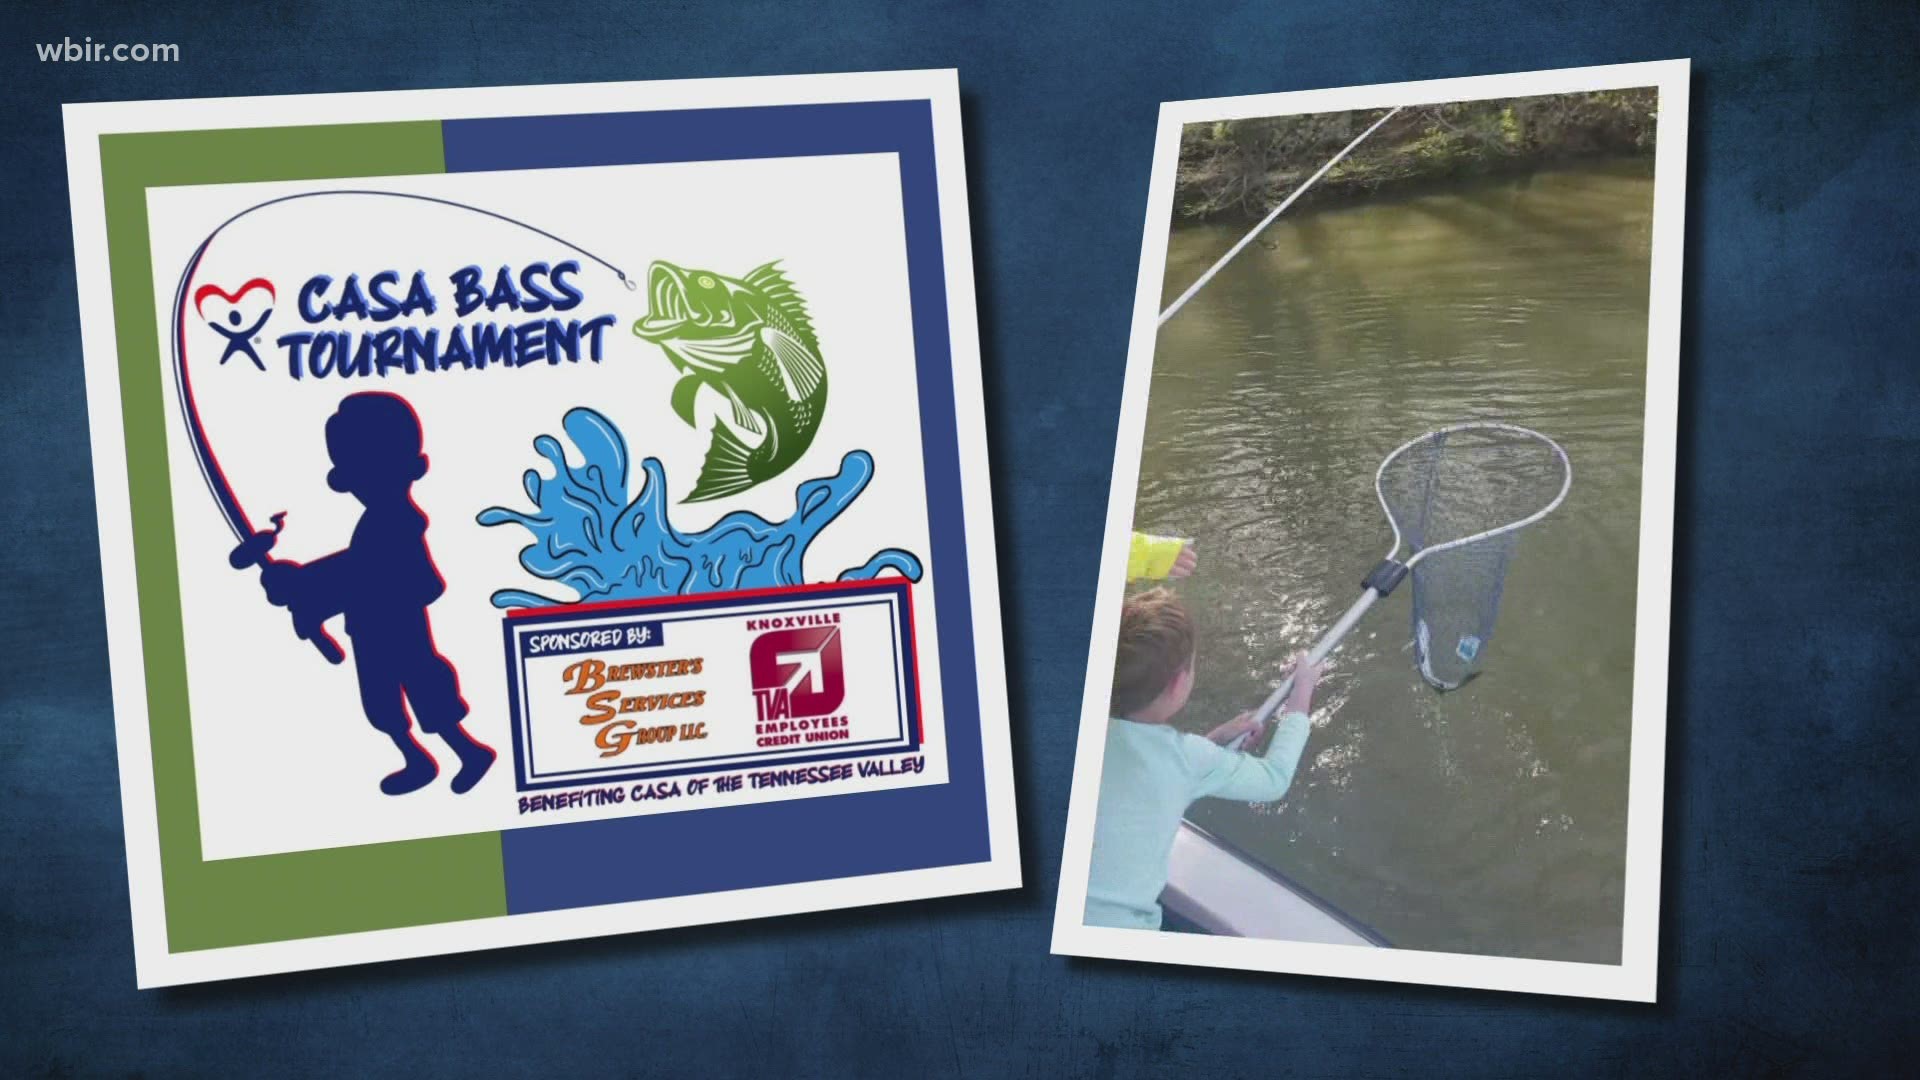 CASA stands for Court Appointed Special Advocates. Their bass tournament is May 8 in Lenoir City. April 28, 2021-4pm.